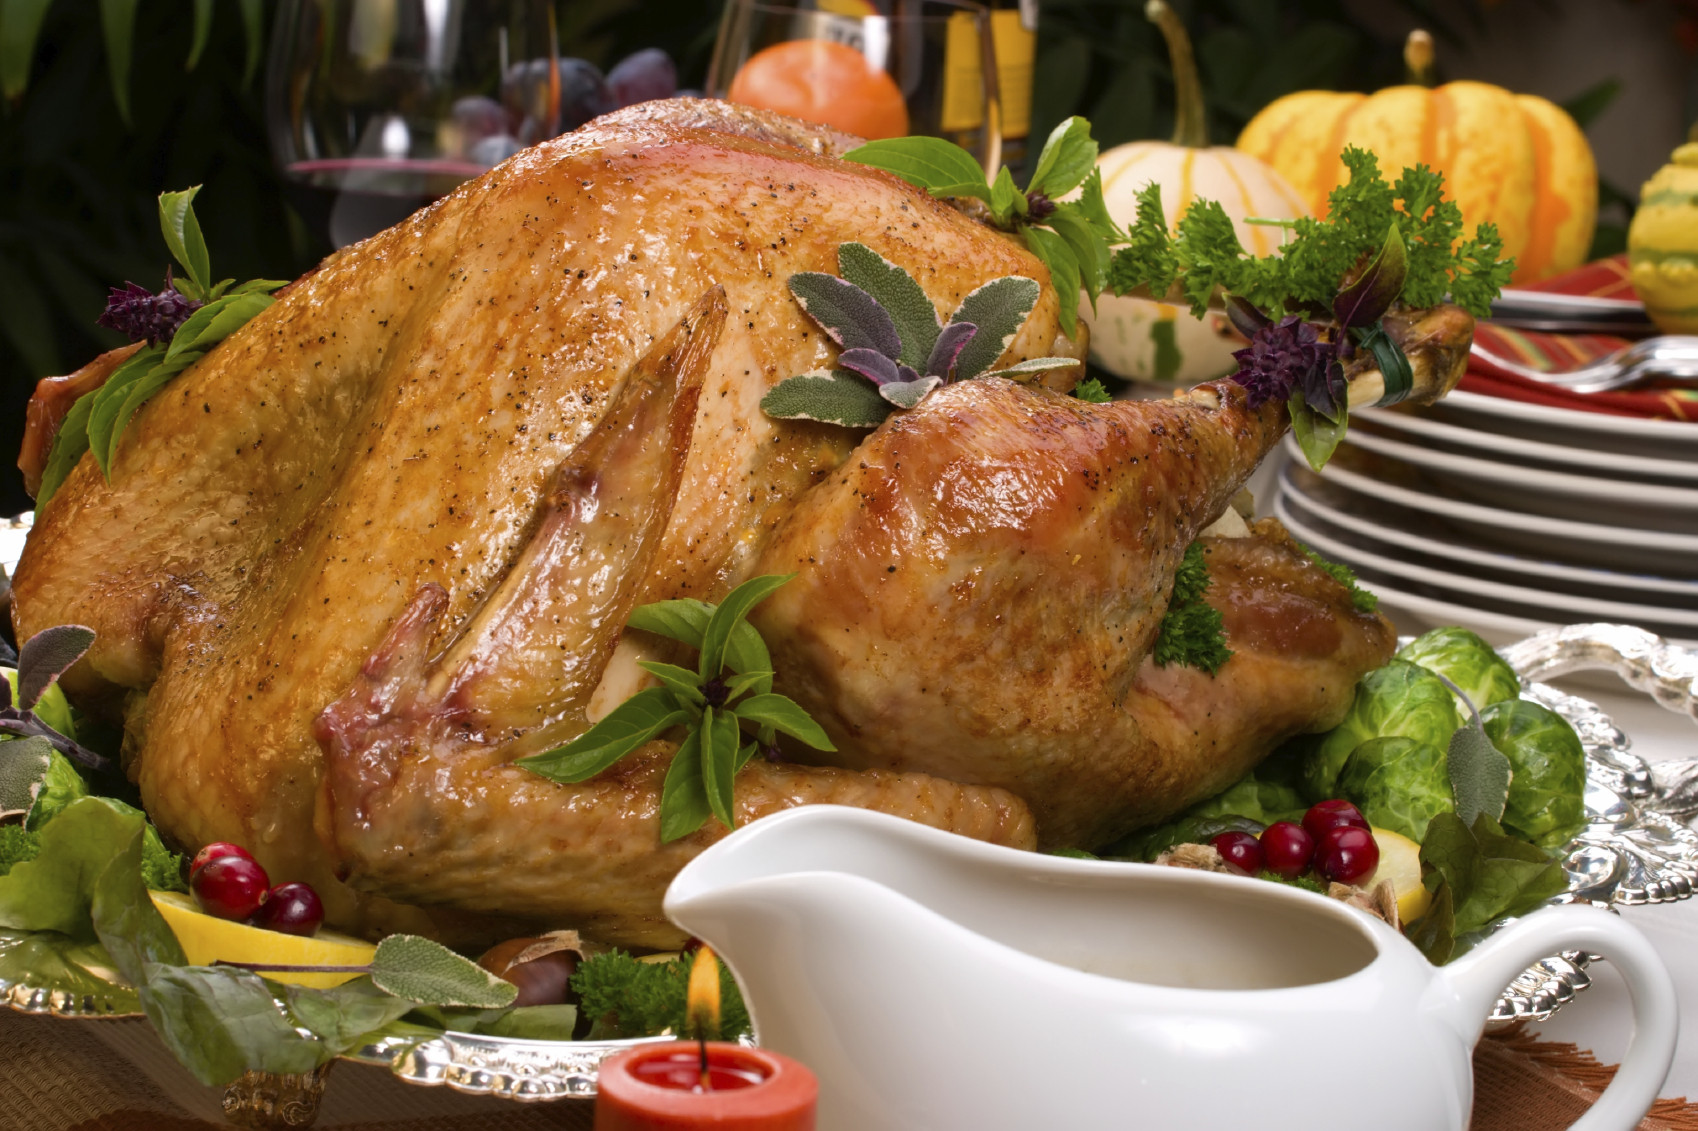 Prepare A Turkey For Thanksgiving
 Tips for preparing your holiday turkey – News from